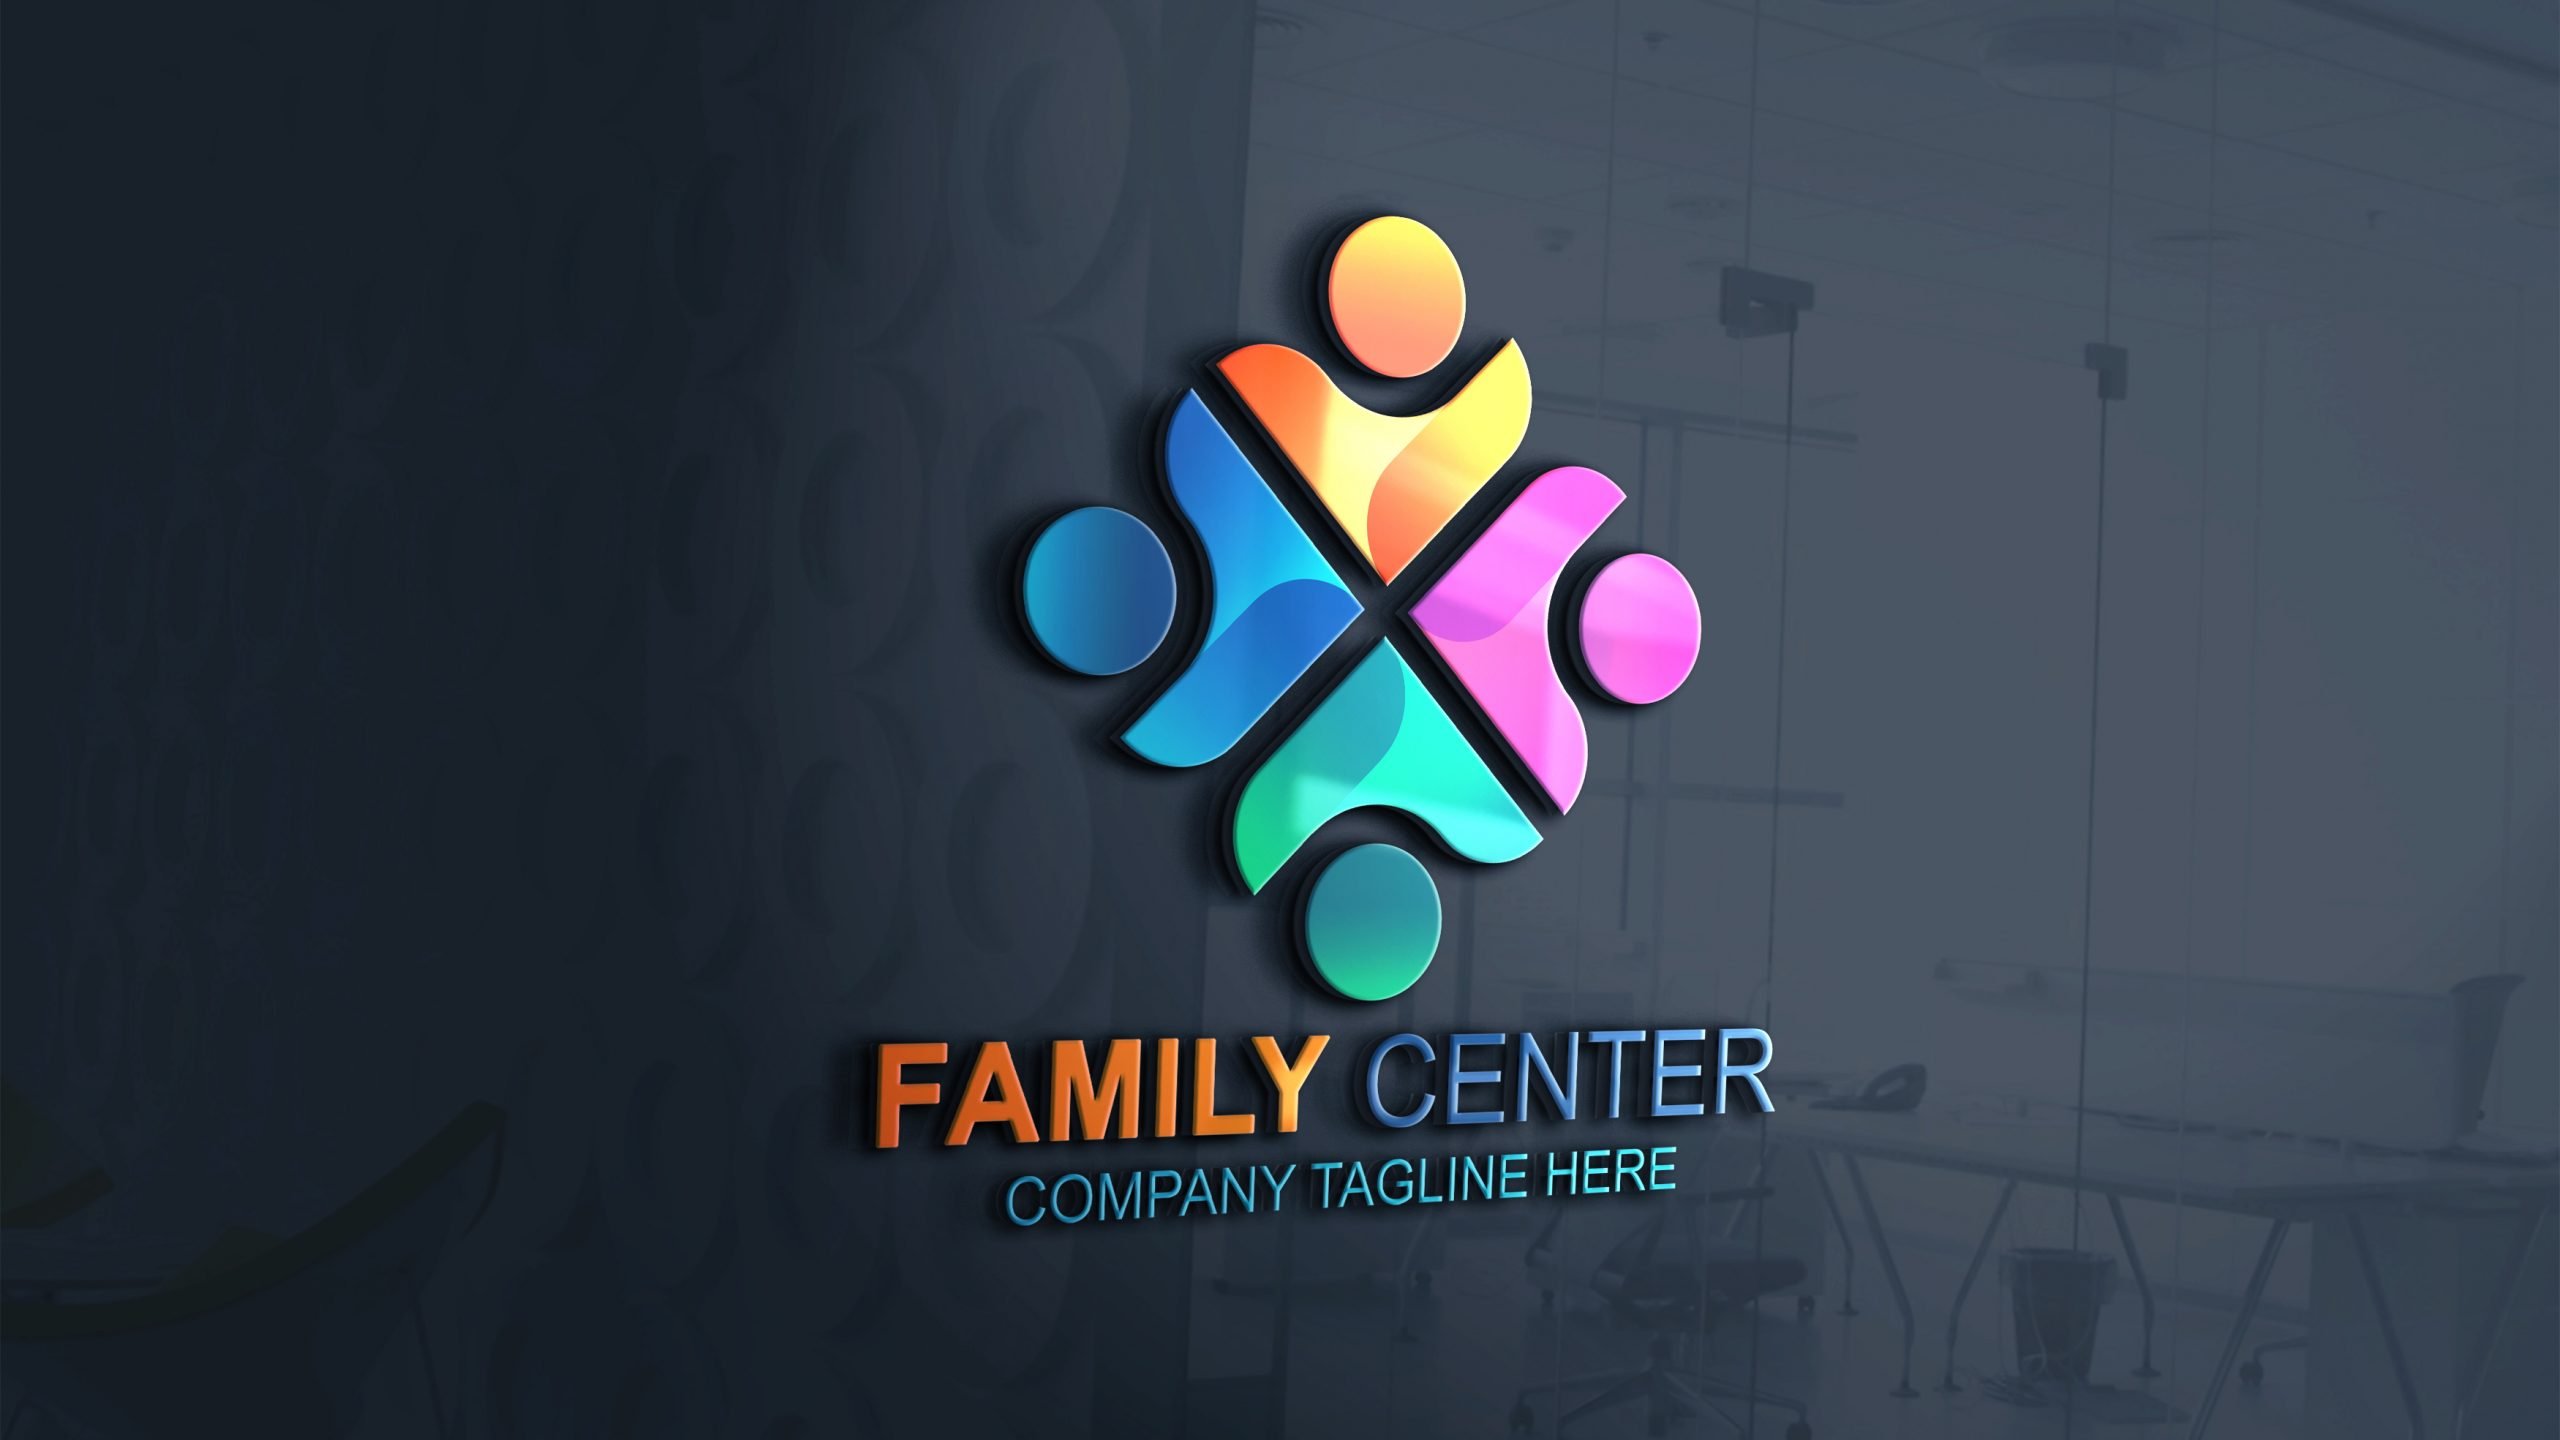 Free PSD Graphic Design Logo Template – GraphicsFamily